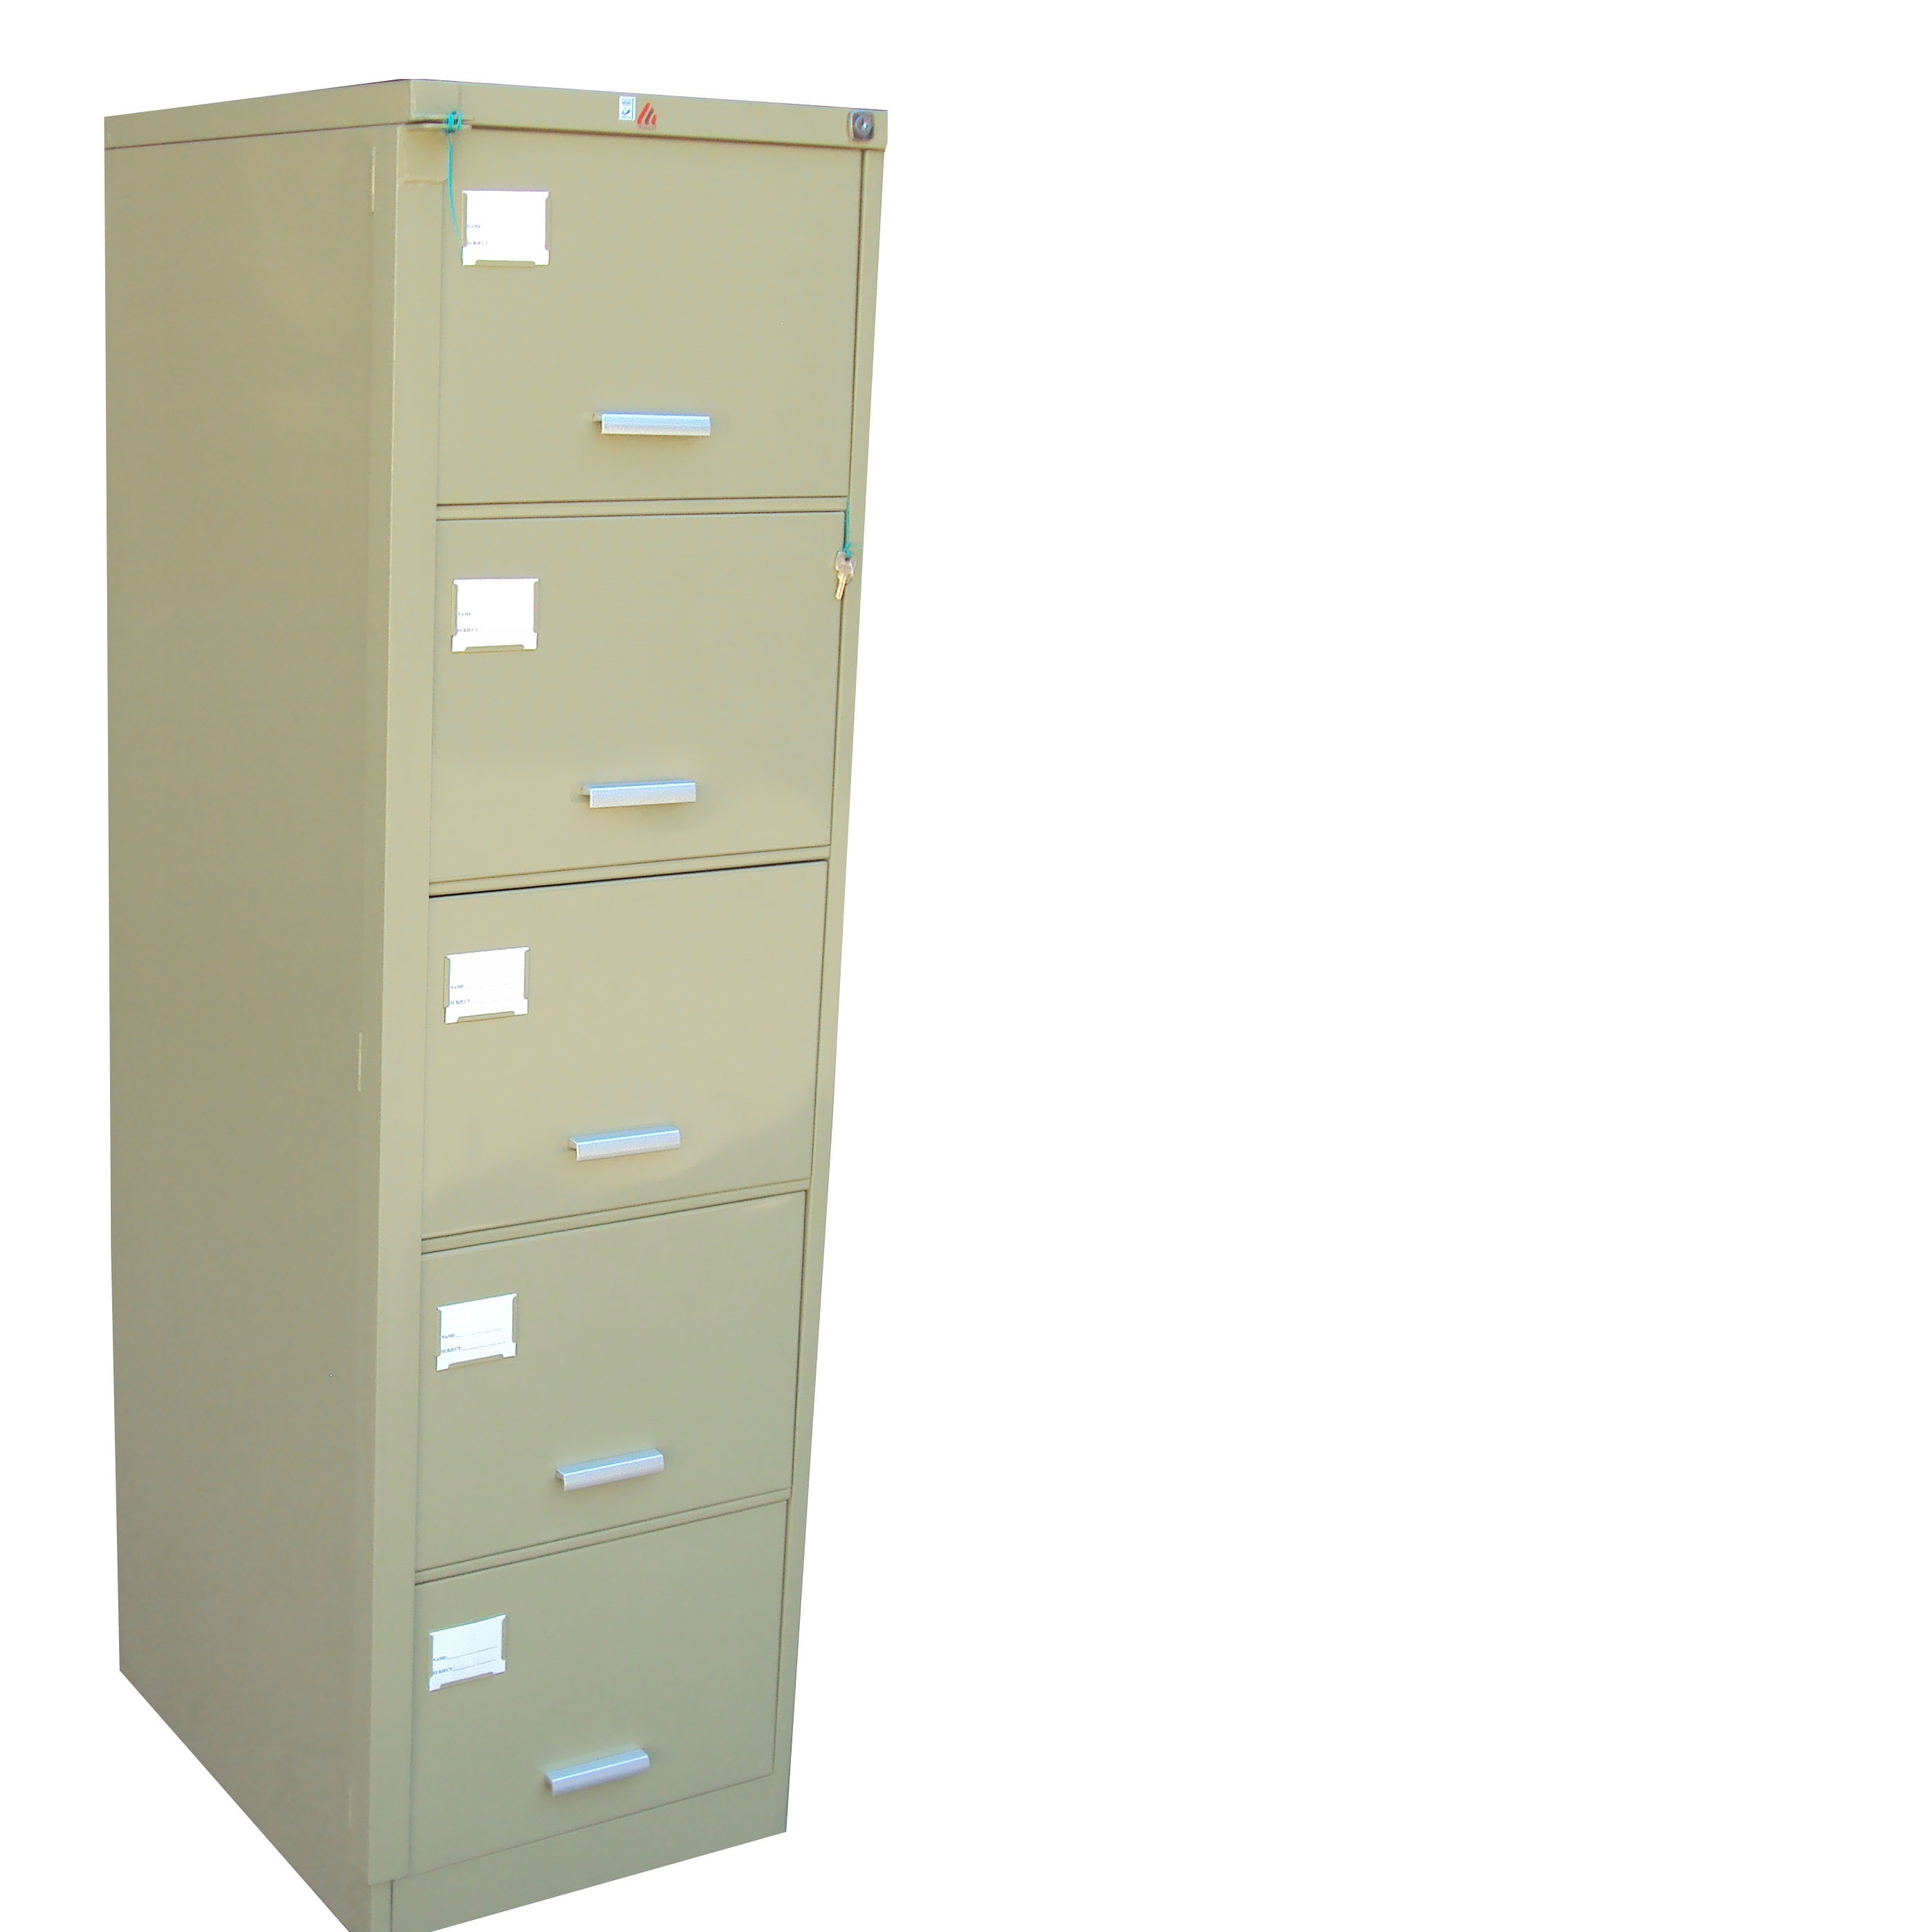 5 Drawer Filing Cabinet Ashut Engineers Limited intended for measurements 2792 X 2792